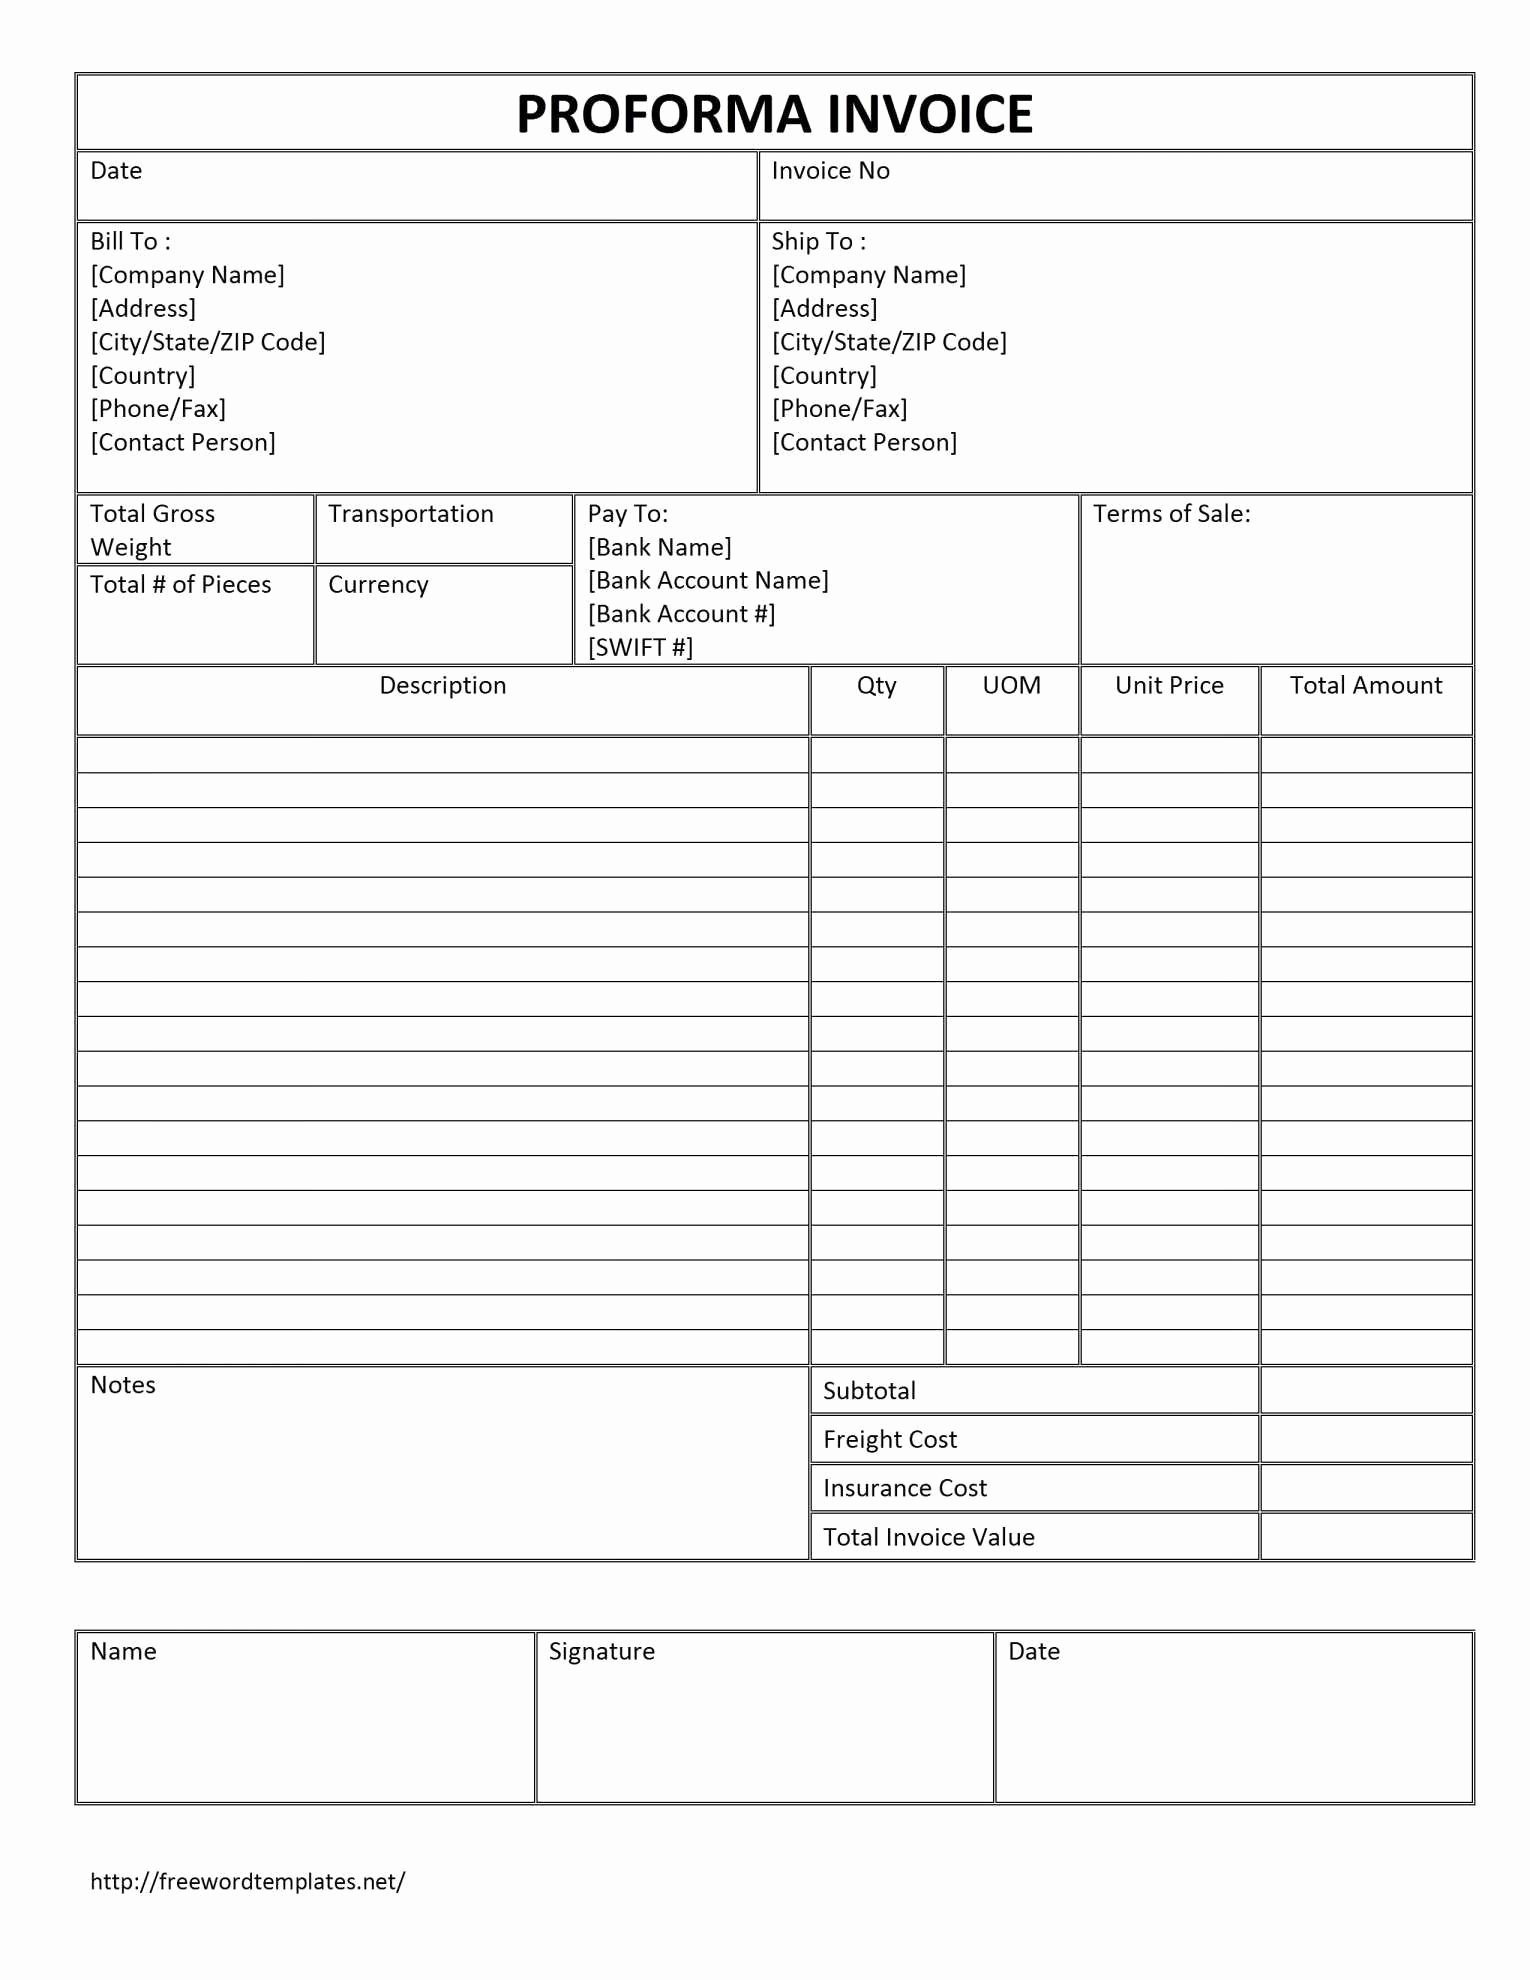 Record Keeping For Small Business Templates Best Of Accounting and Basic Accounting Spreadsheet For Small Business